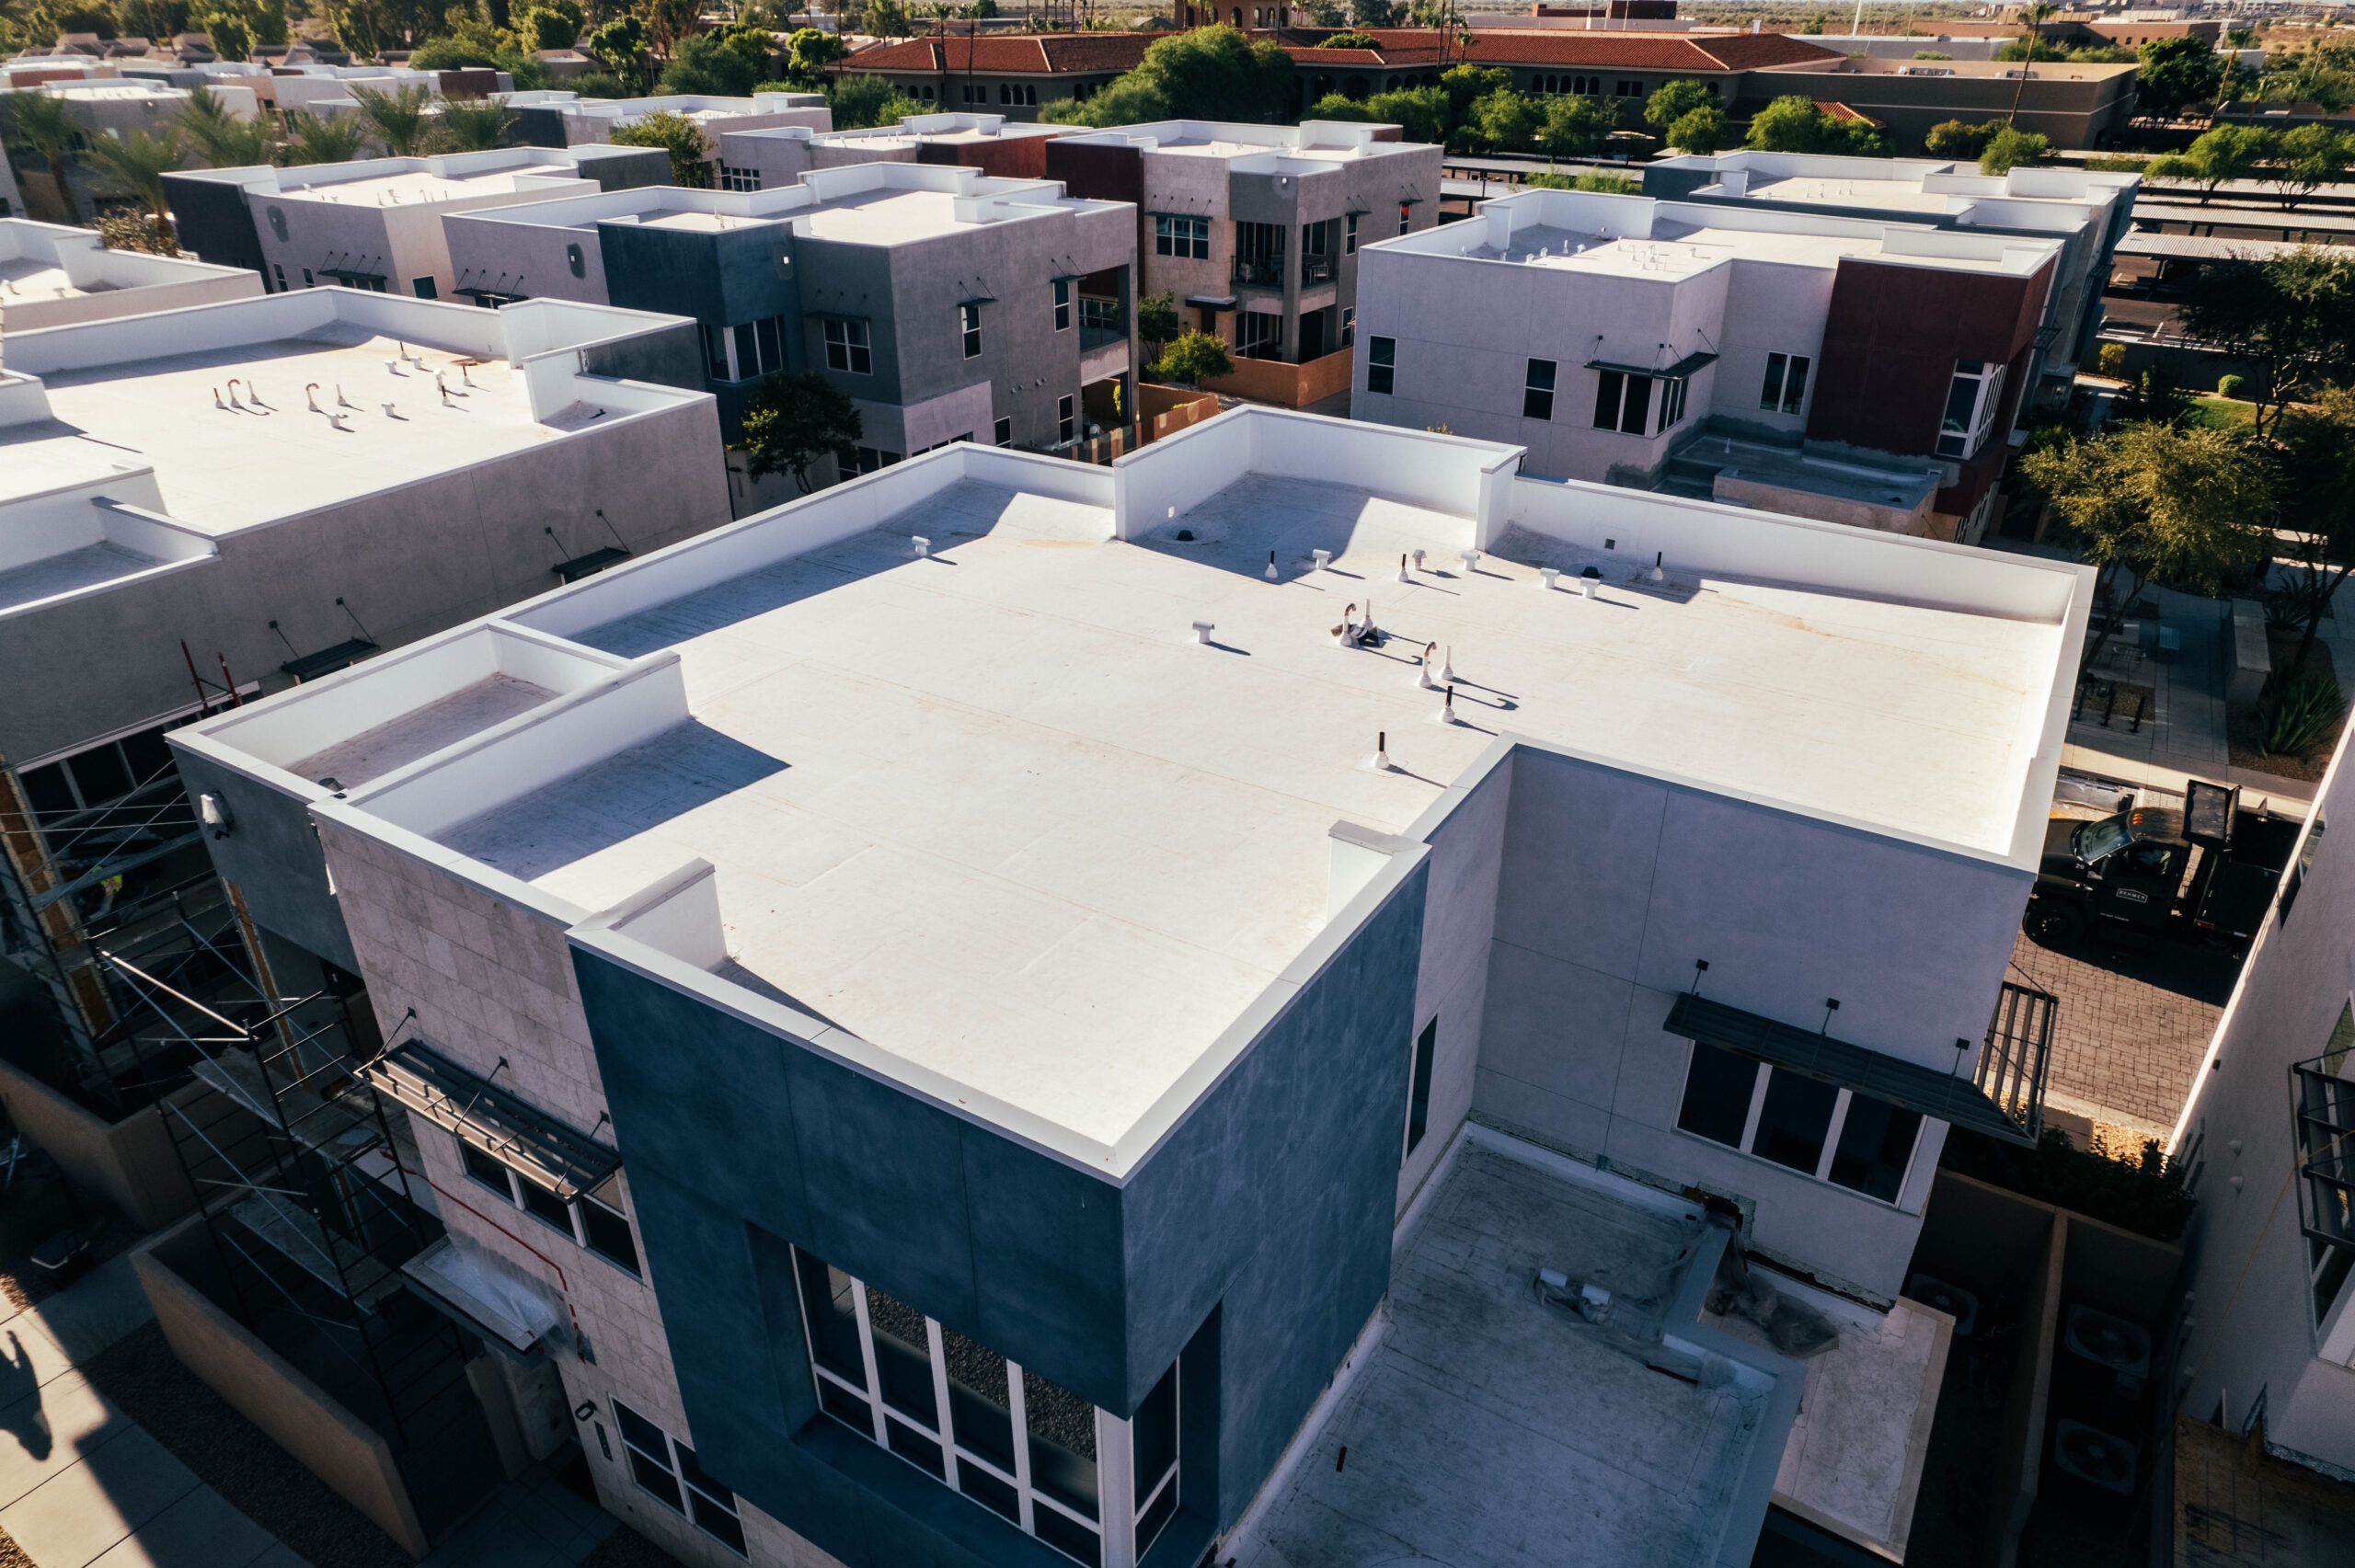 Apartment complex in Glendale showcasing its energy-efficient foam roof coating.